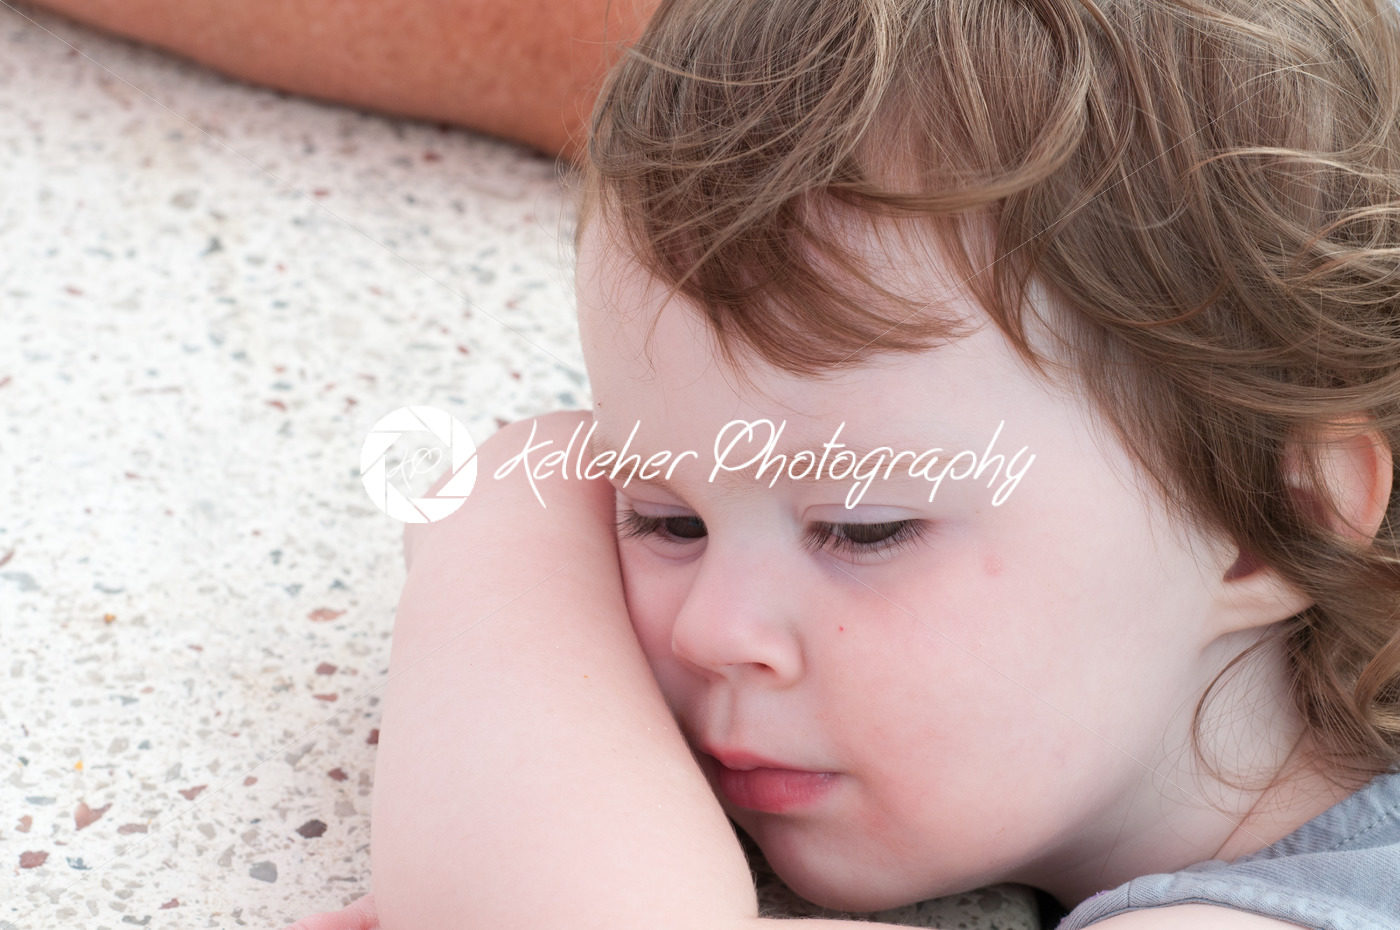 Cute young toddler girl falling asleep resting her head on table - Kelleher Photography Store